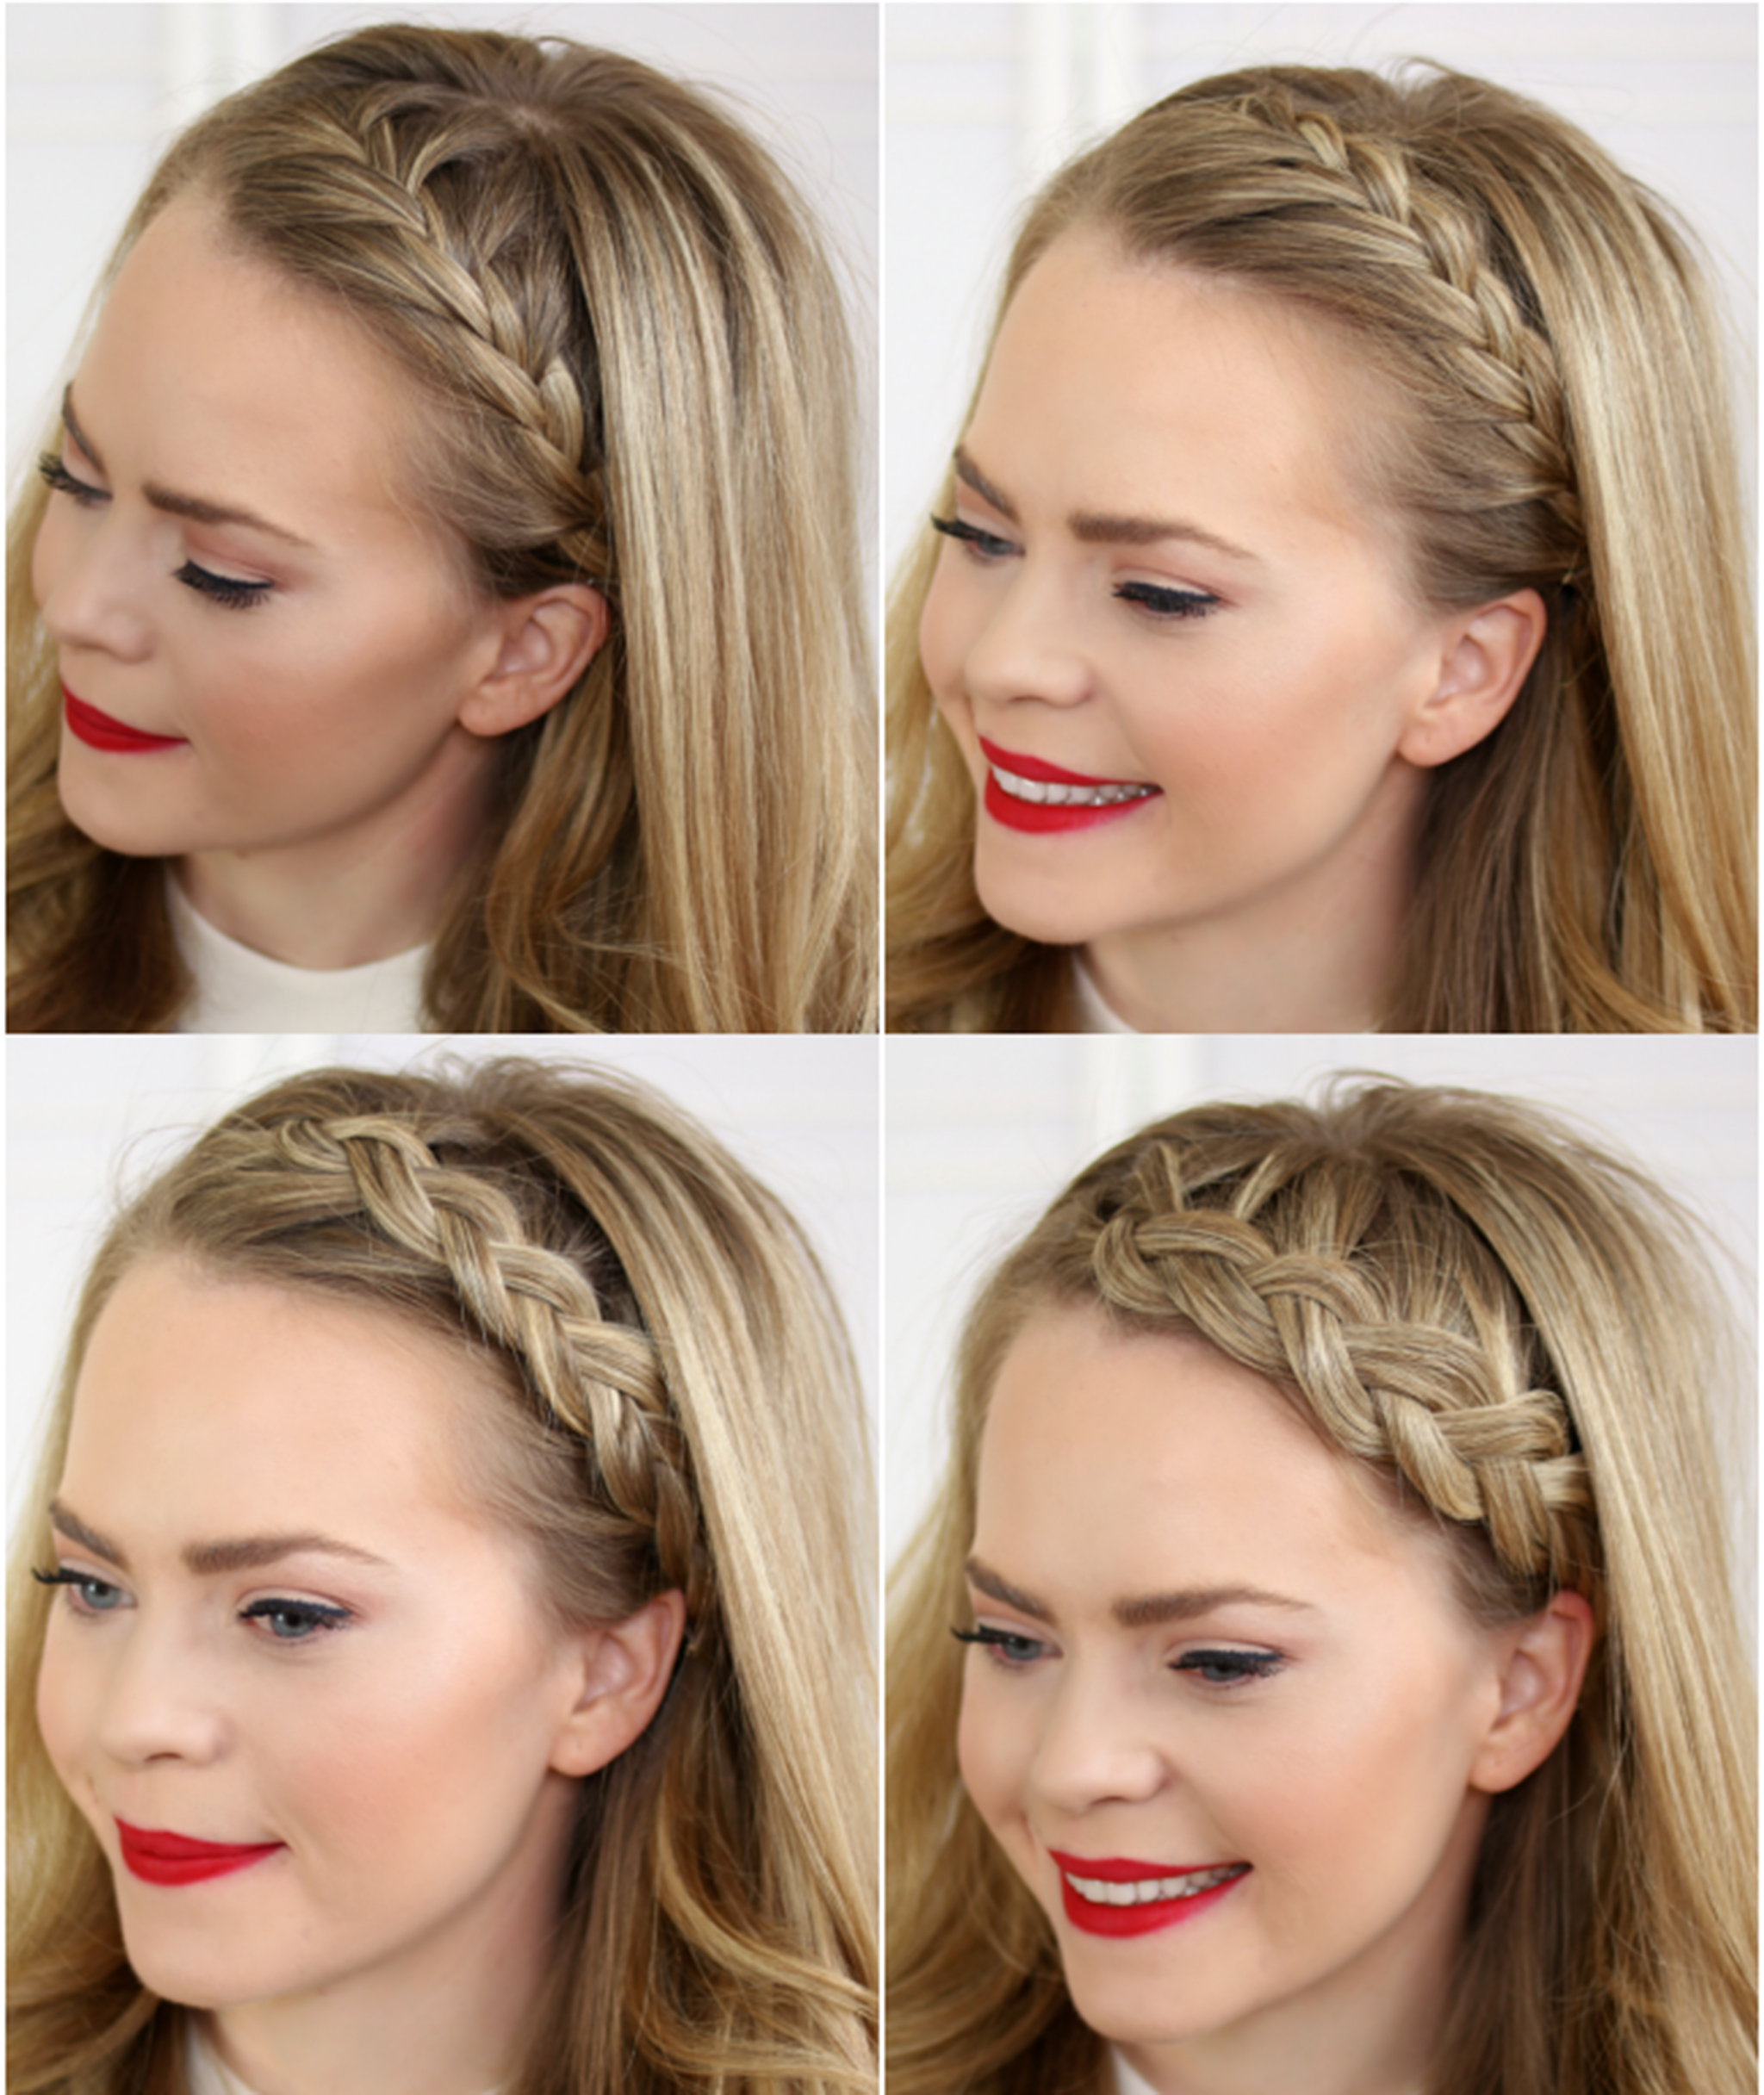 Top 10 Quick & Easy Braided Hairstyles Step By Step - Hairstyles Tutorials